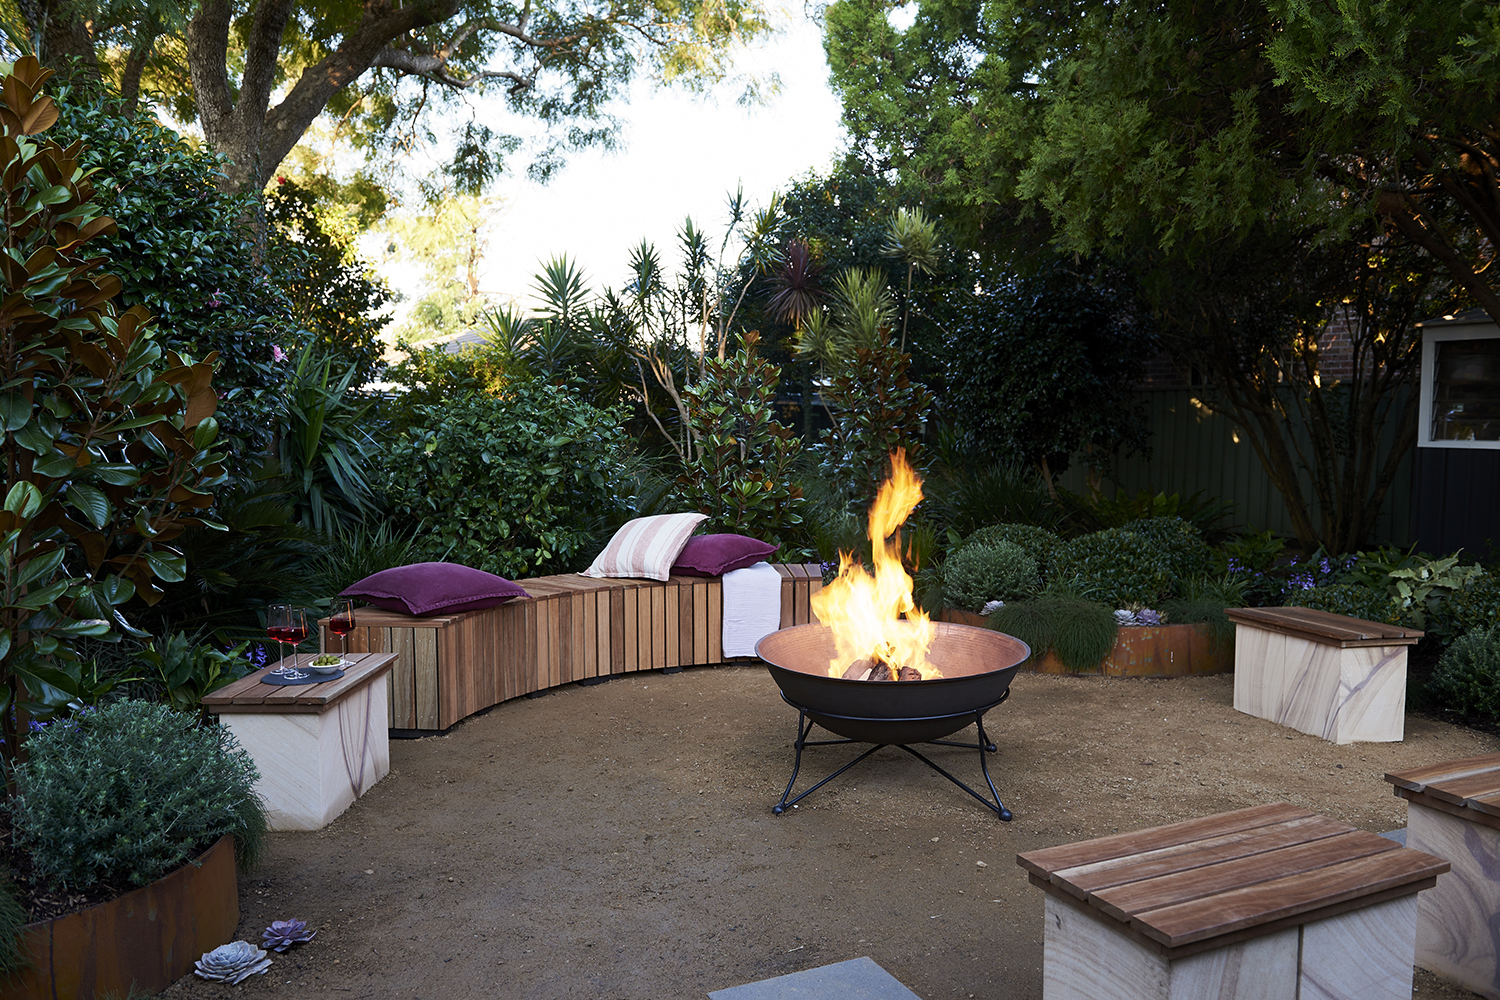 Adam Dovile Make A Fire Pit, How To Build A Fire Pit Bench Seat